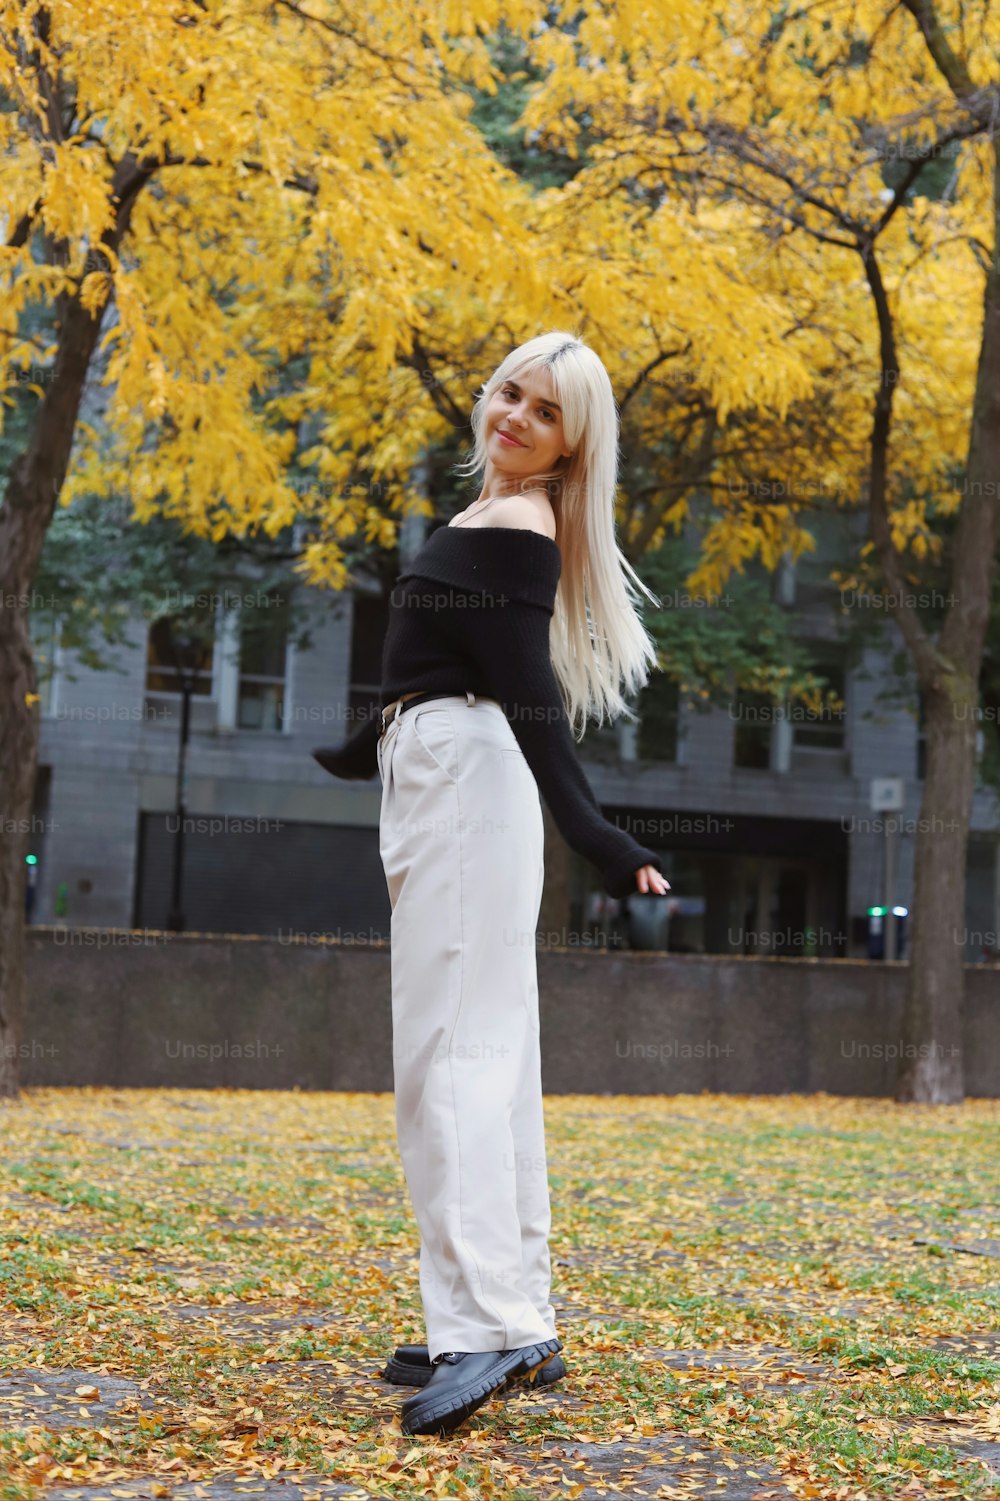 a woman in a black top and white pants